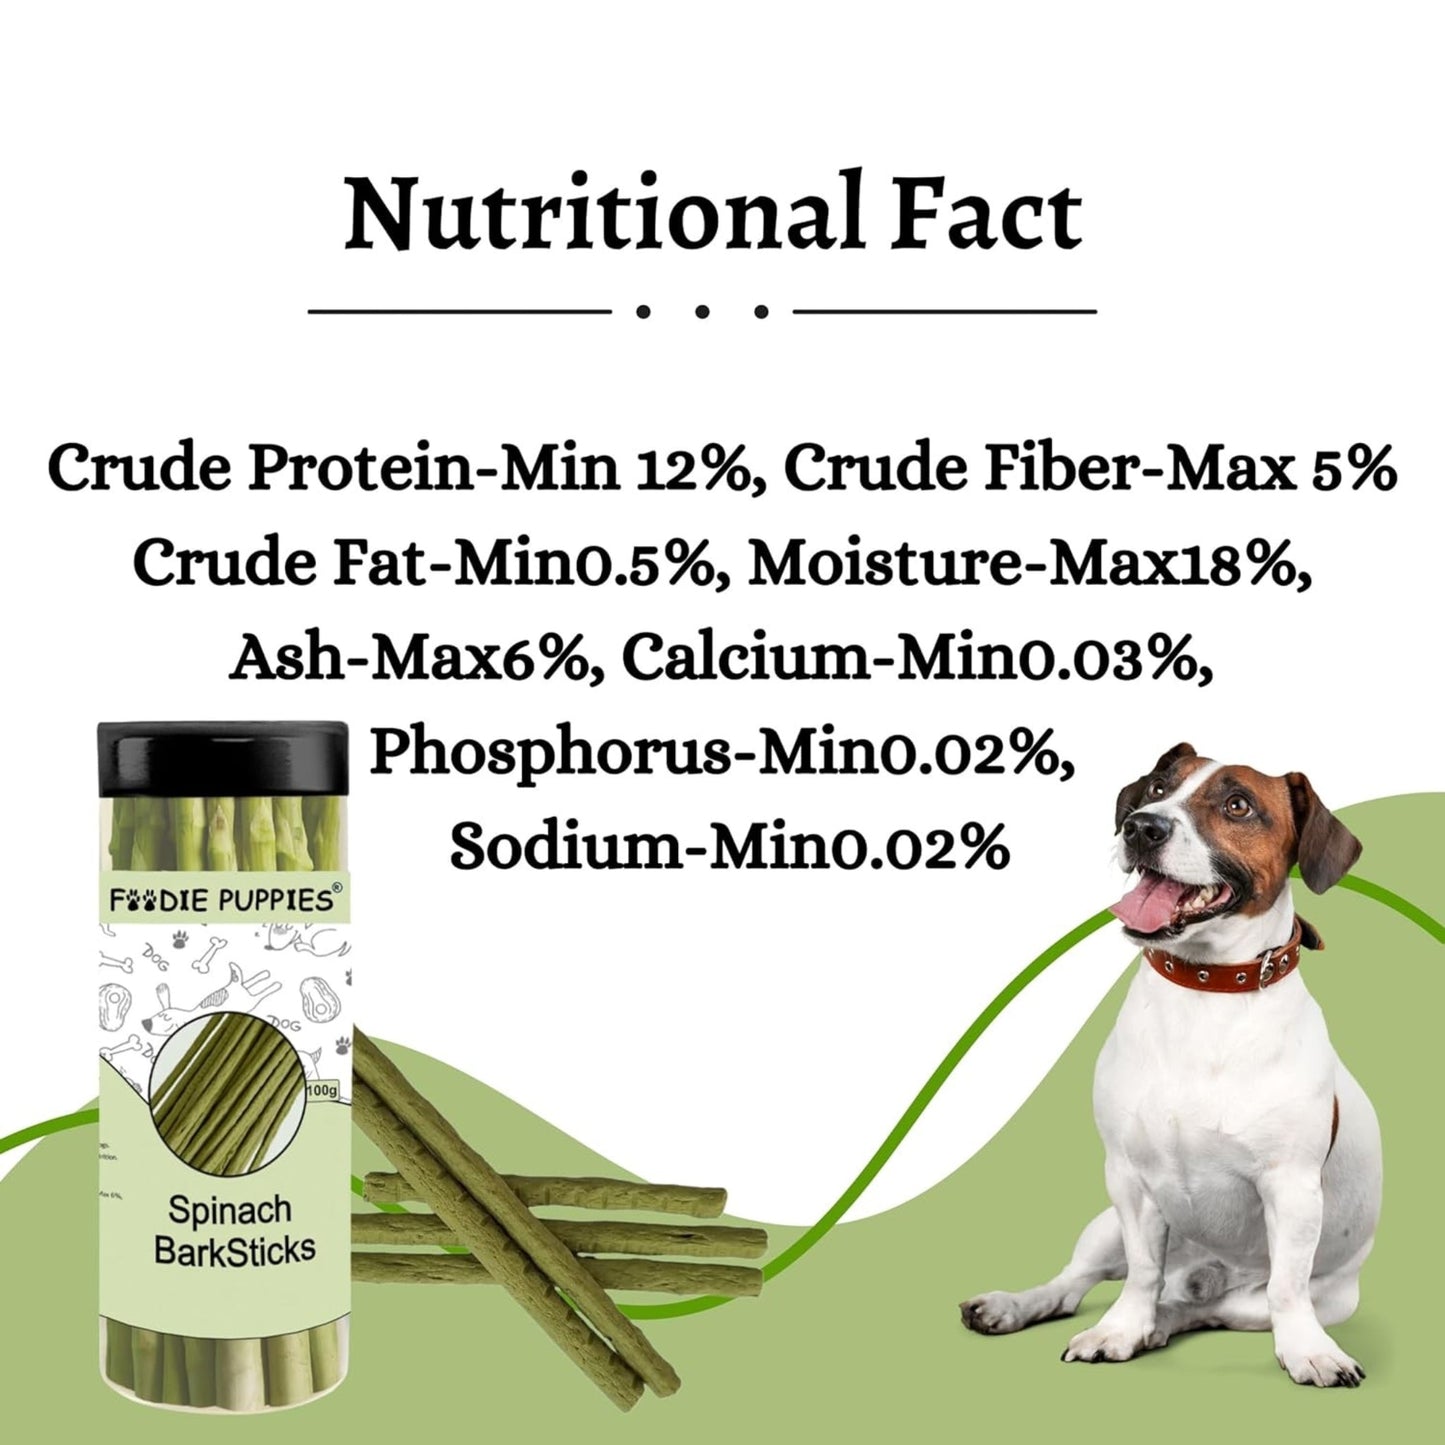 Foodie Puppies Barksticks Spinach Sticks Treat for Dogs - 100g, Pack of 2